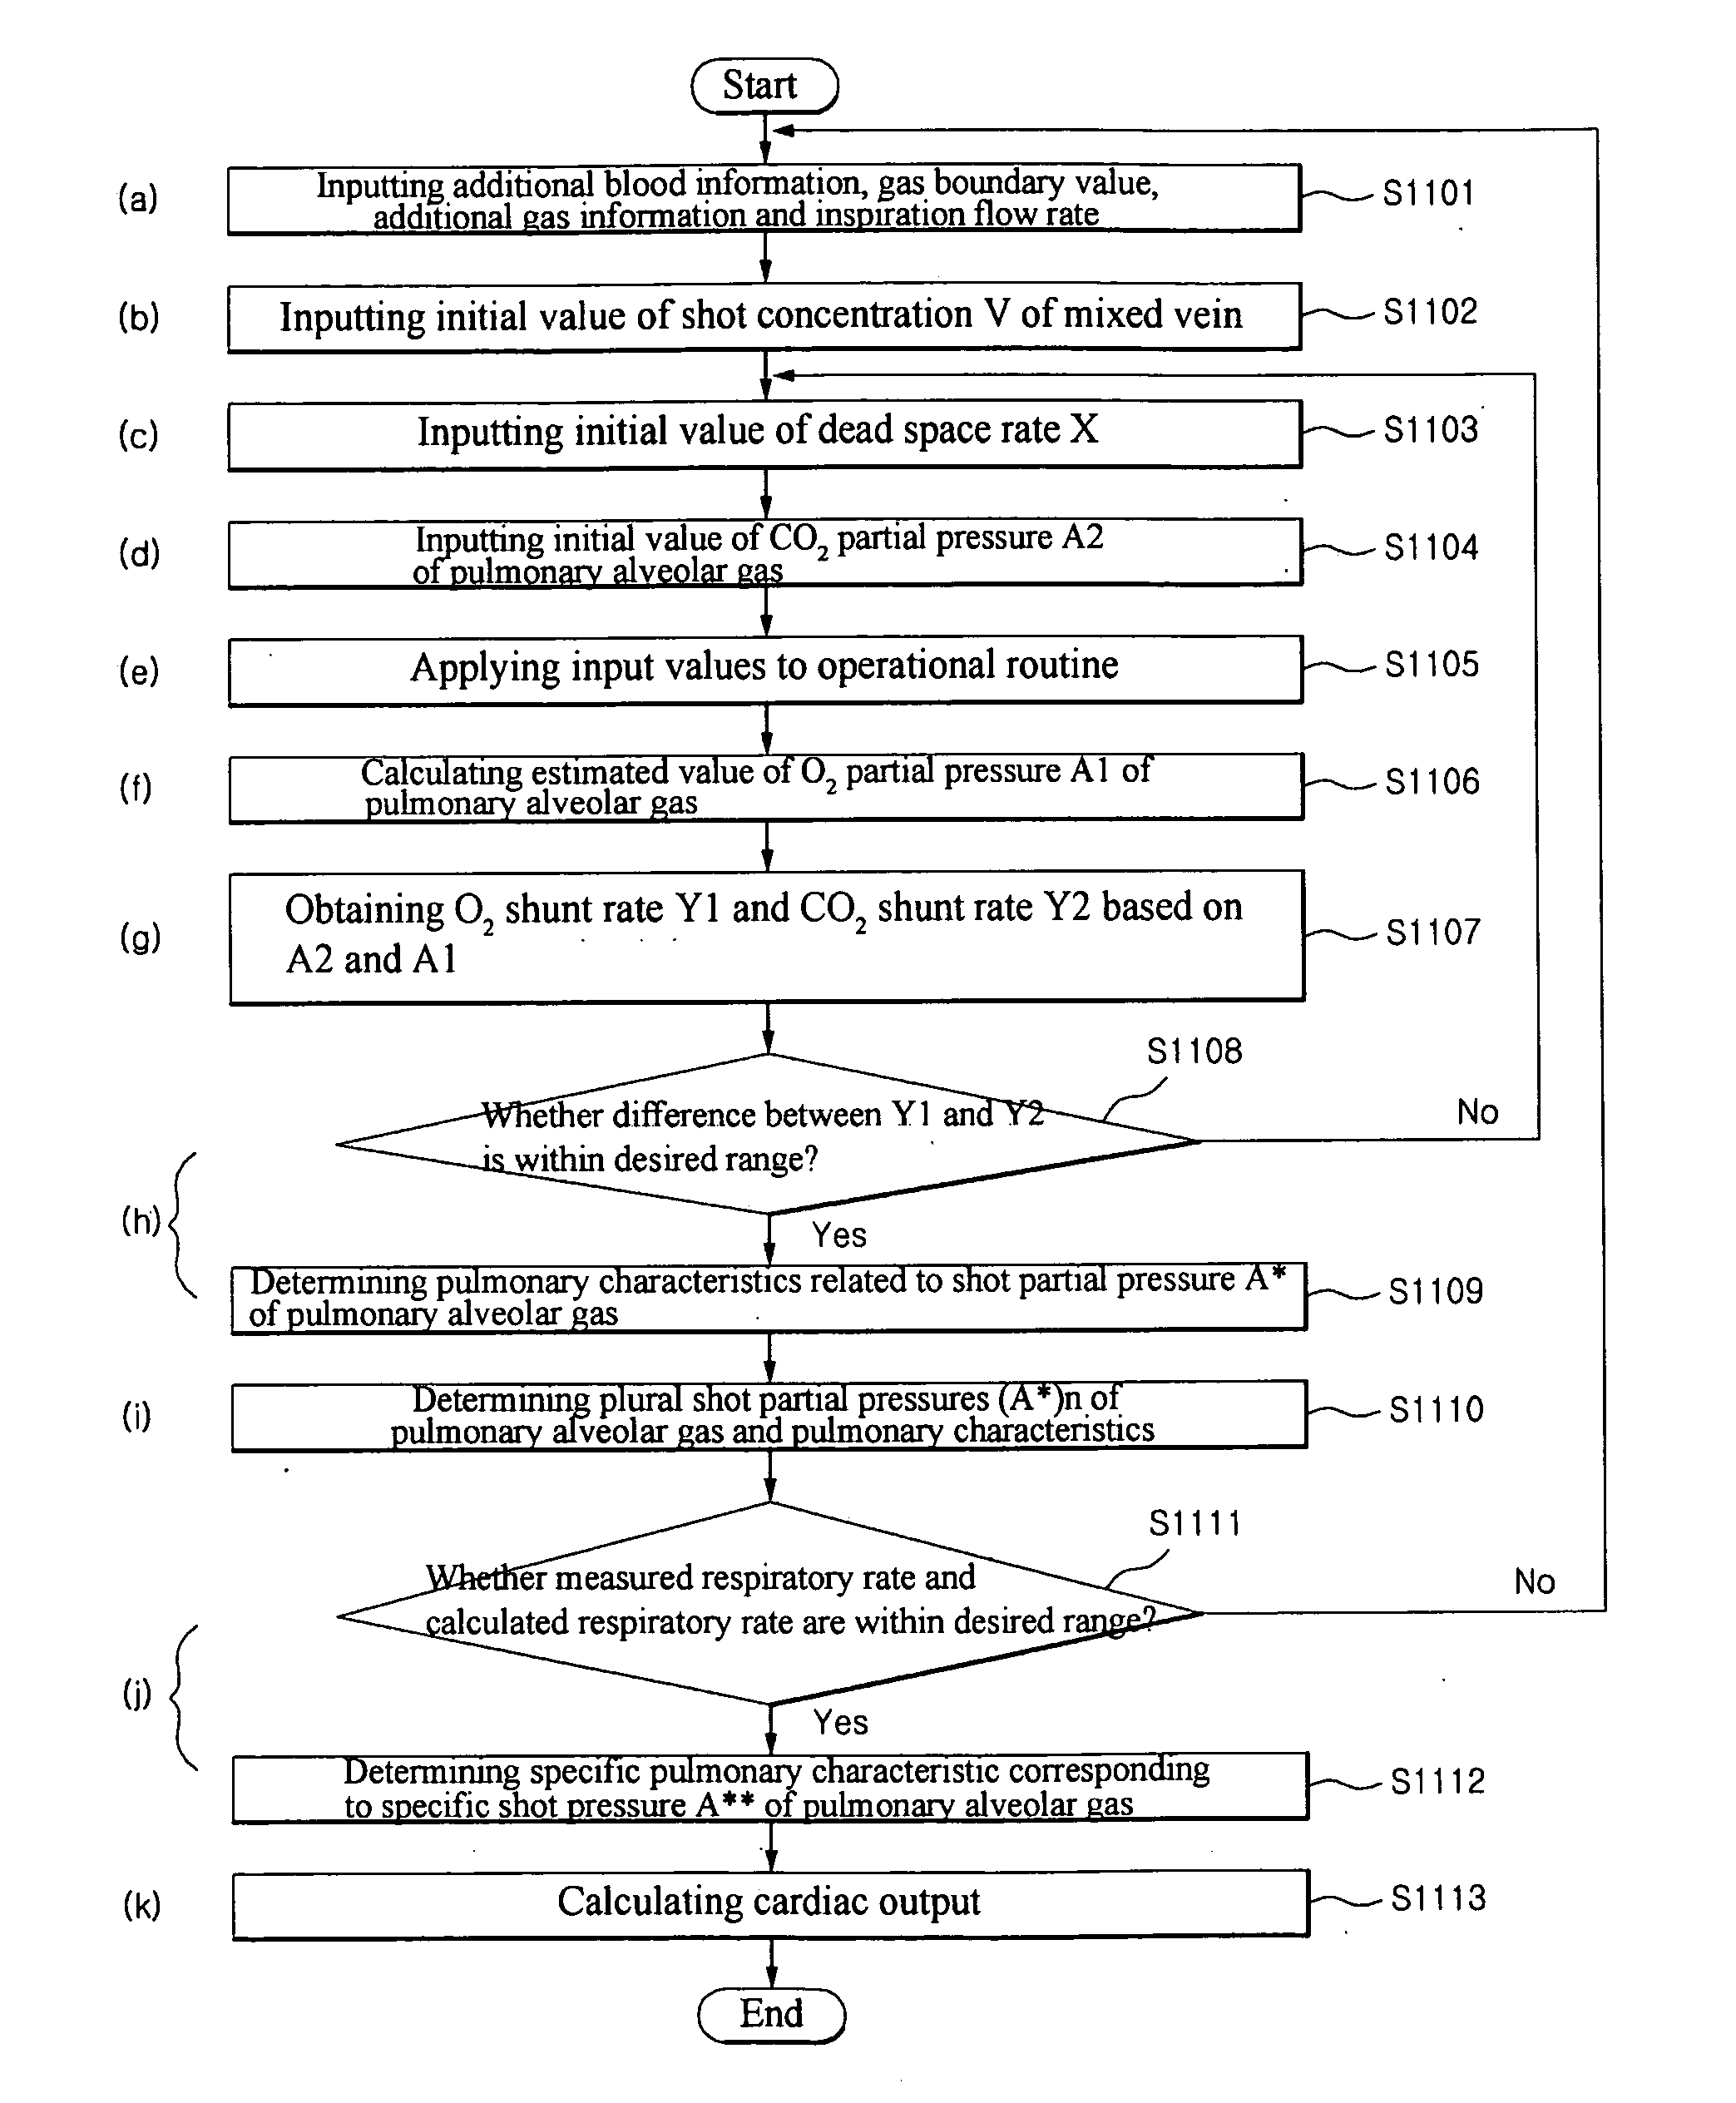 Method and display apparatus for non-invasively determining pulmonary characteristics by measuring breath gas and blood gas